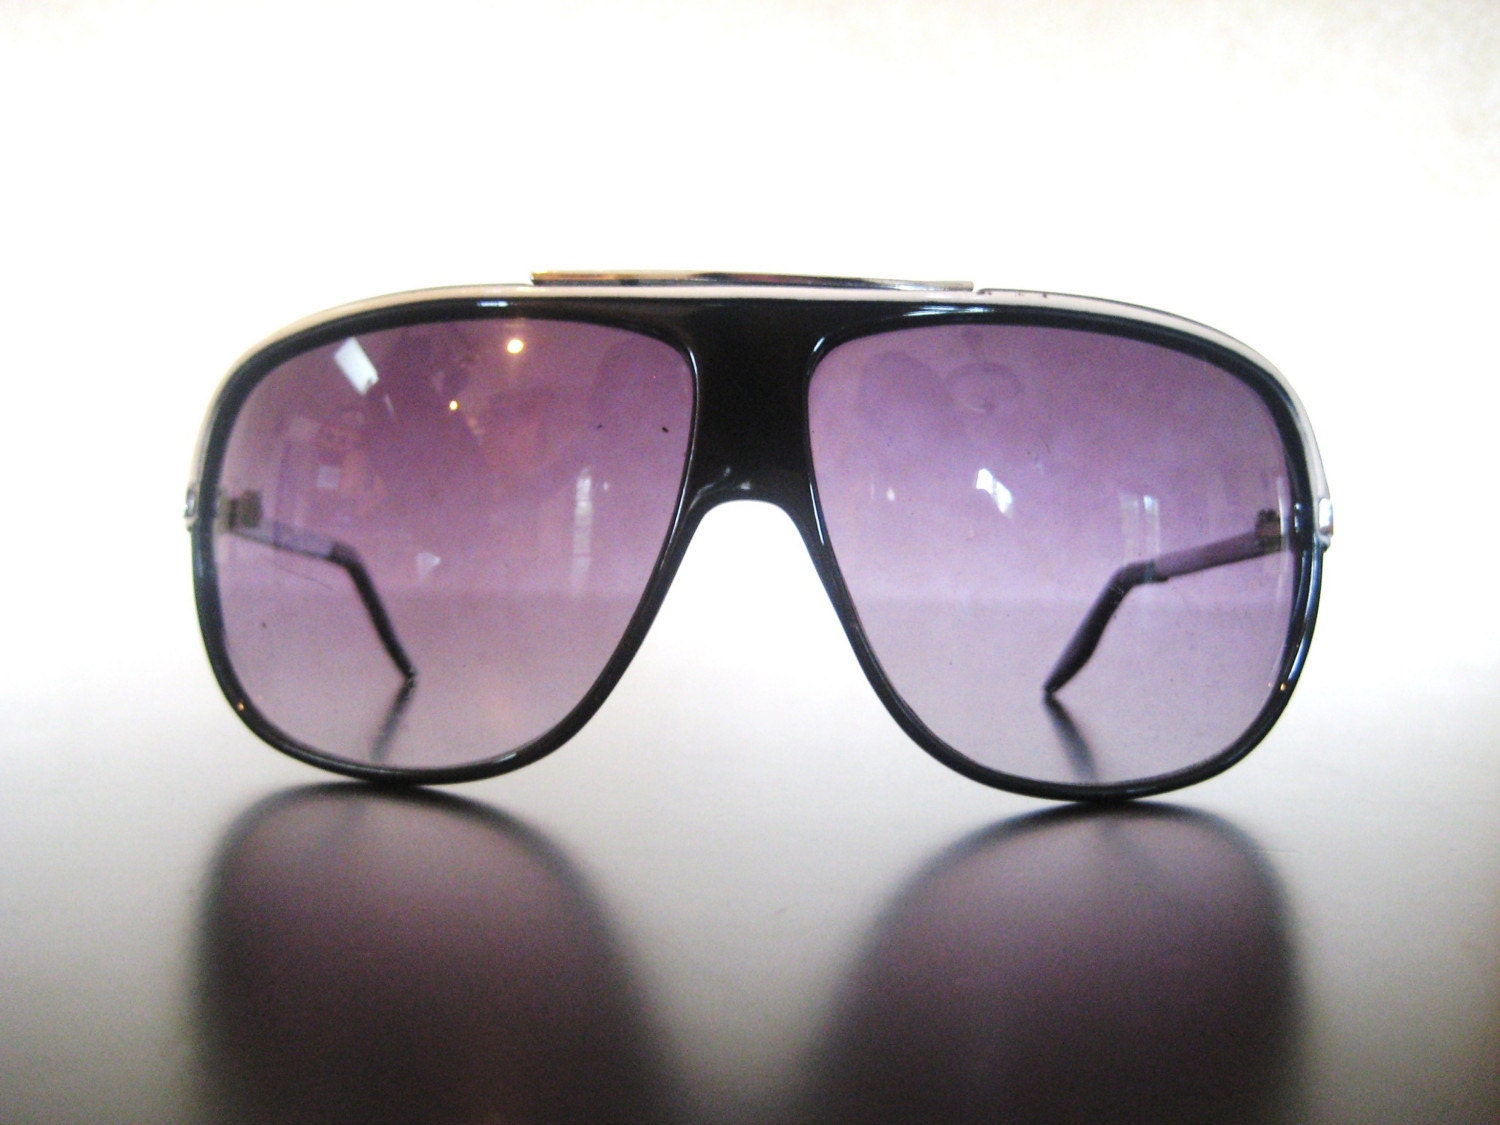 80's Vintage Black and White Plastic Frame Aviator Sunglasses with Silver Metal Details